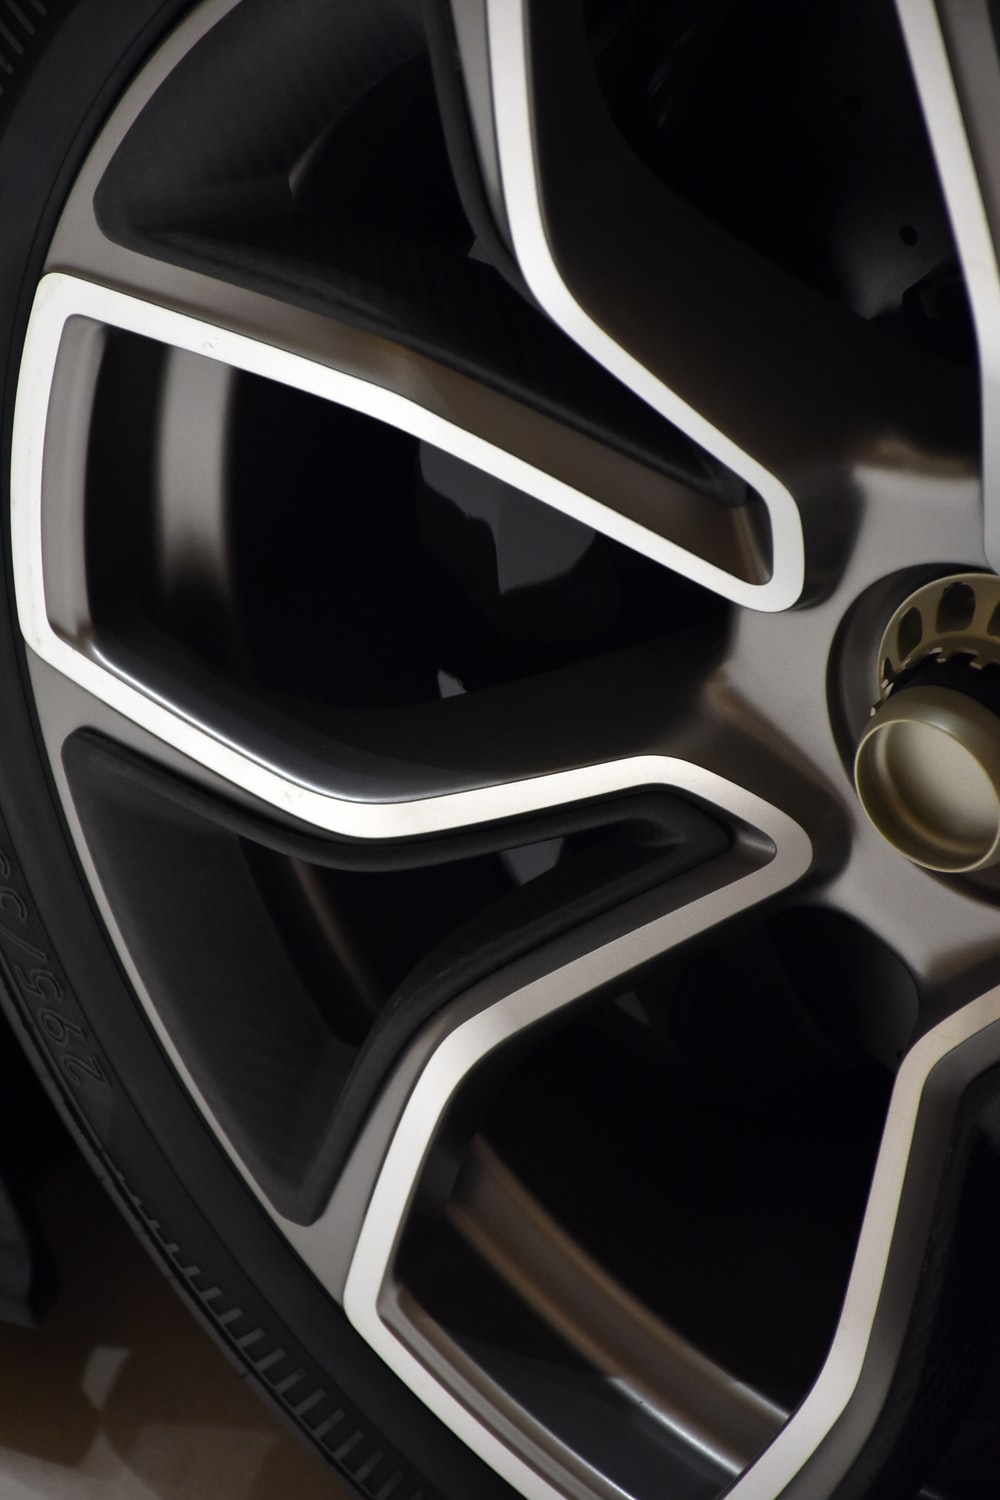 Alloy Wheel Picture. Download Free Image